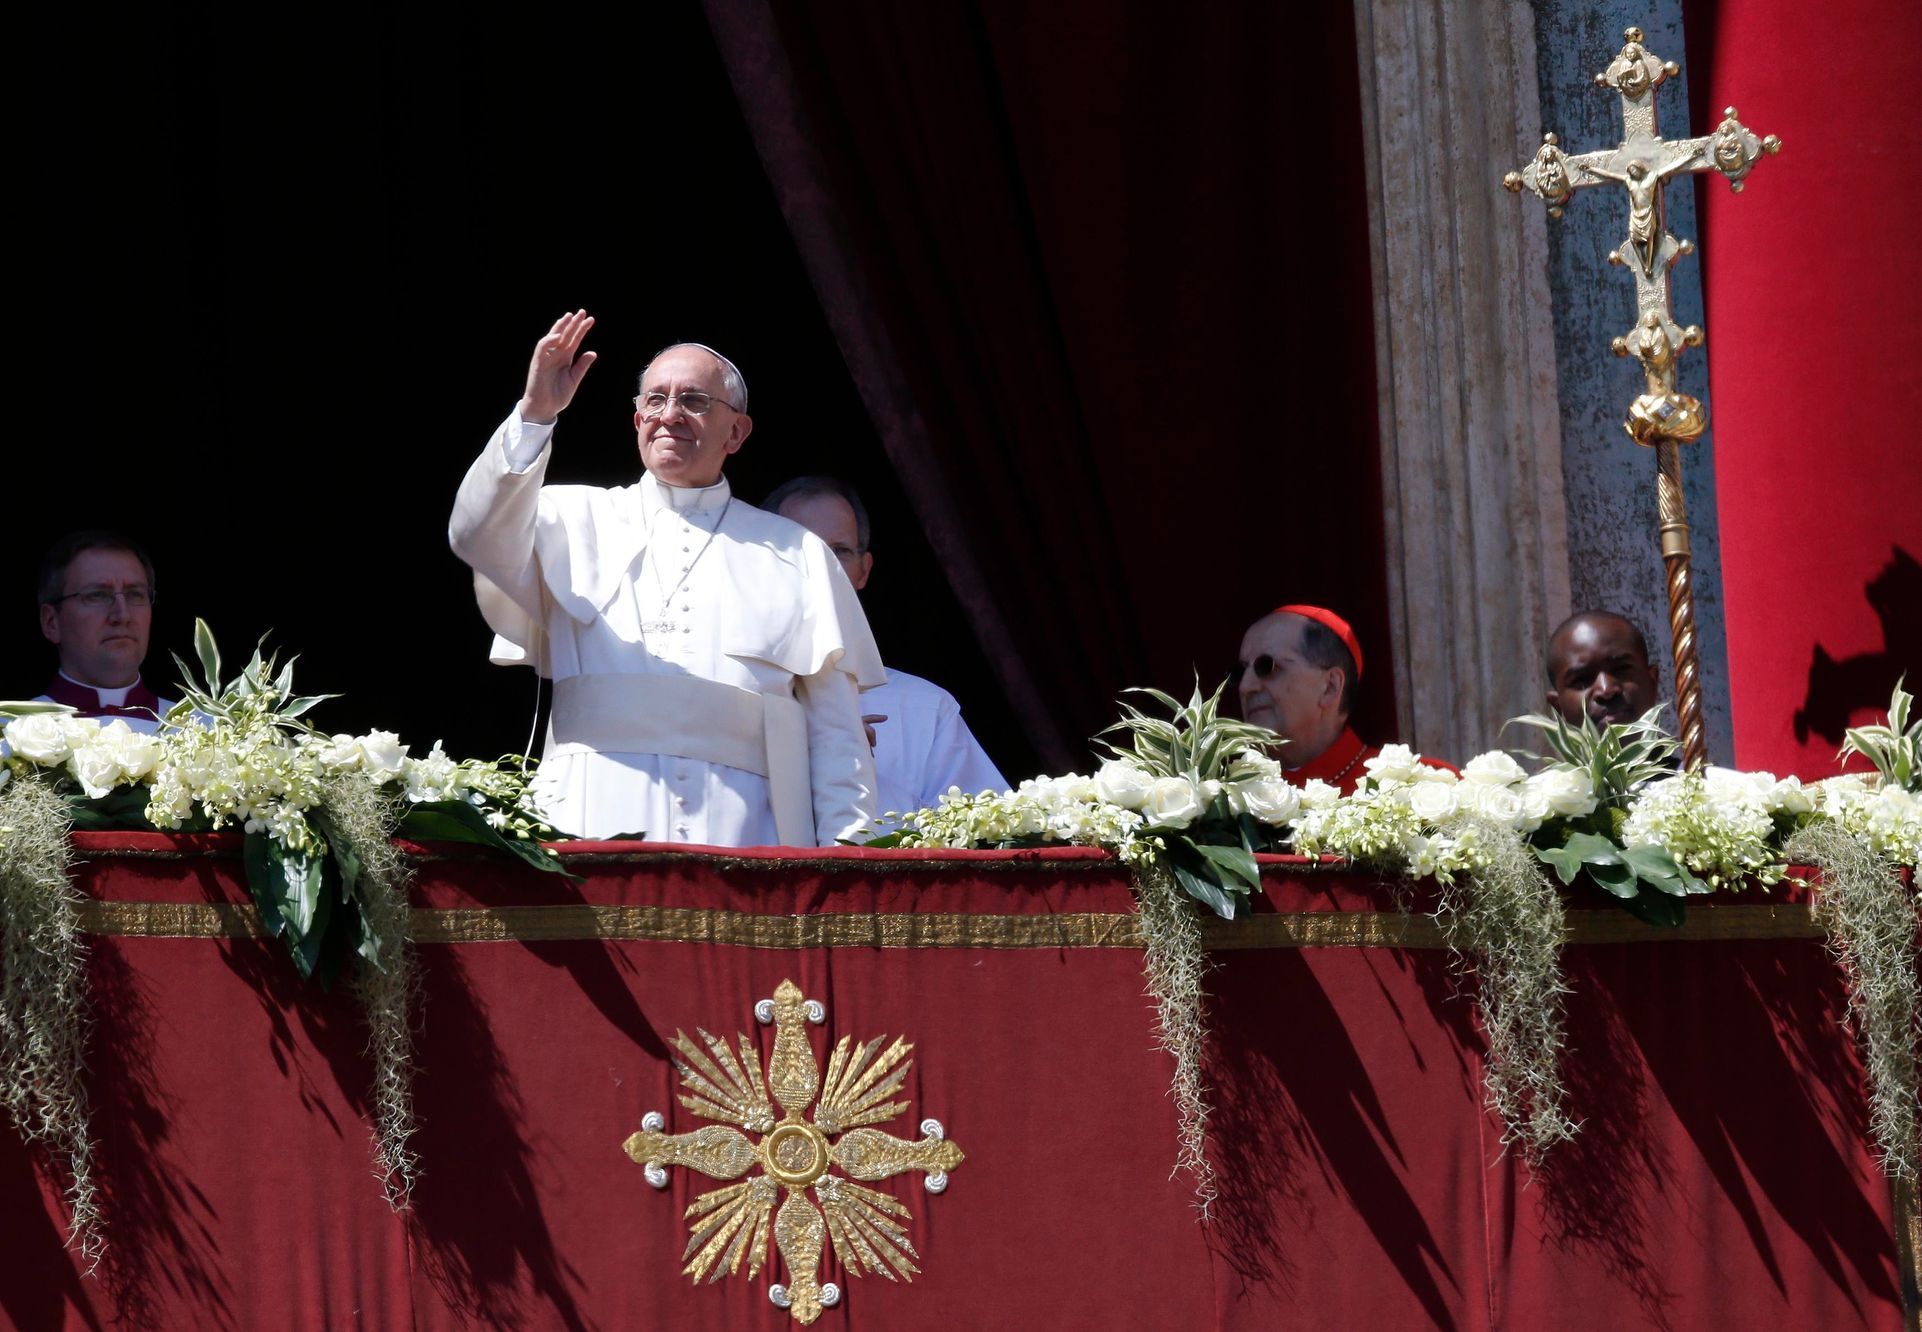 Pope Francis waves as he arrives to deliver the Urbi et Orbi (to the city and the world) benediction at the end of the Easter Mass in Saint Peter's Square at the Vatican